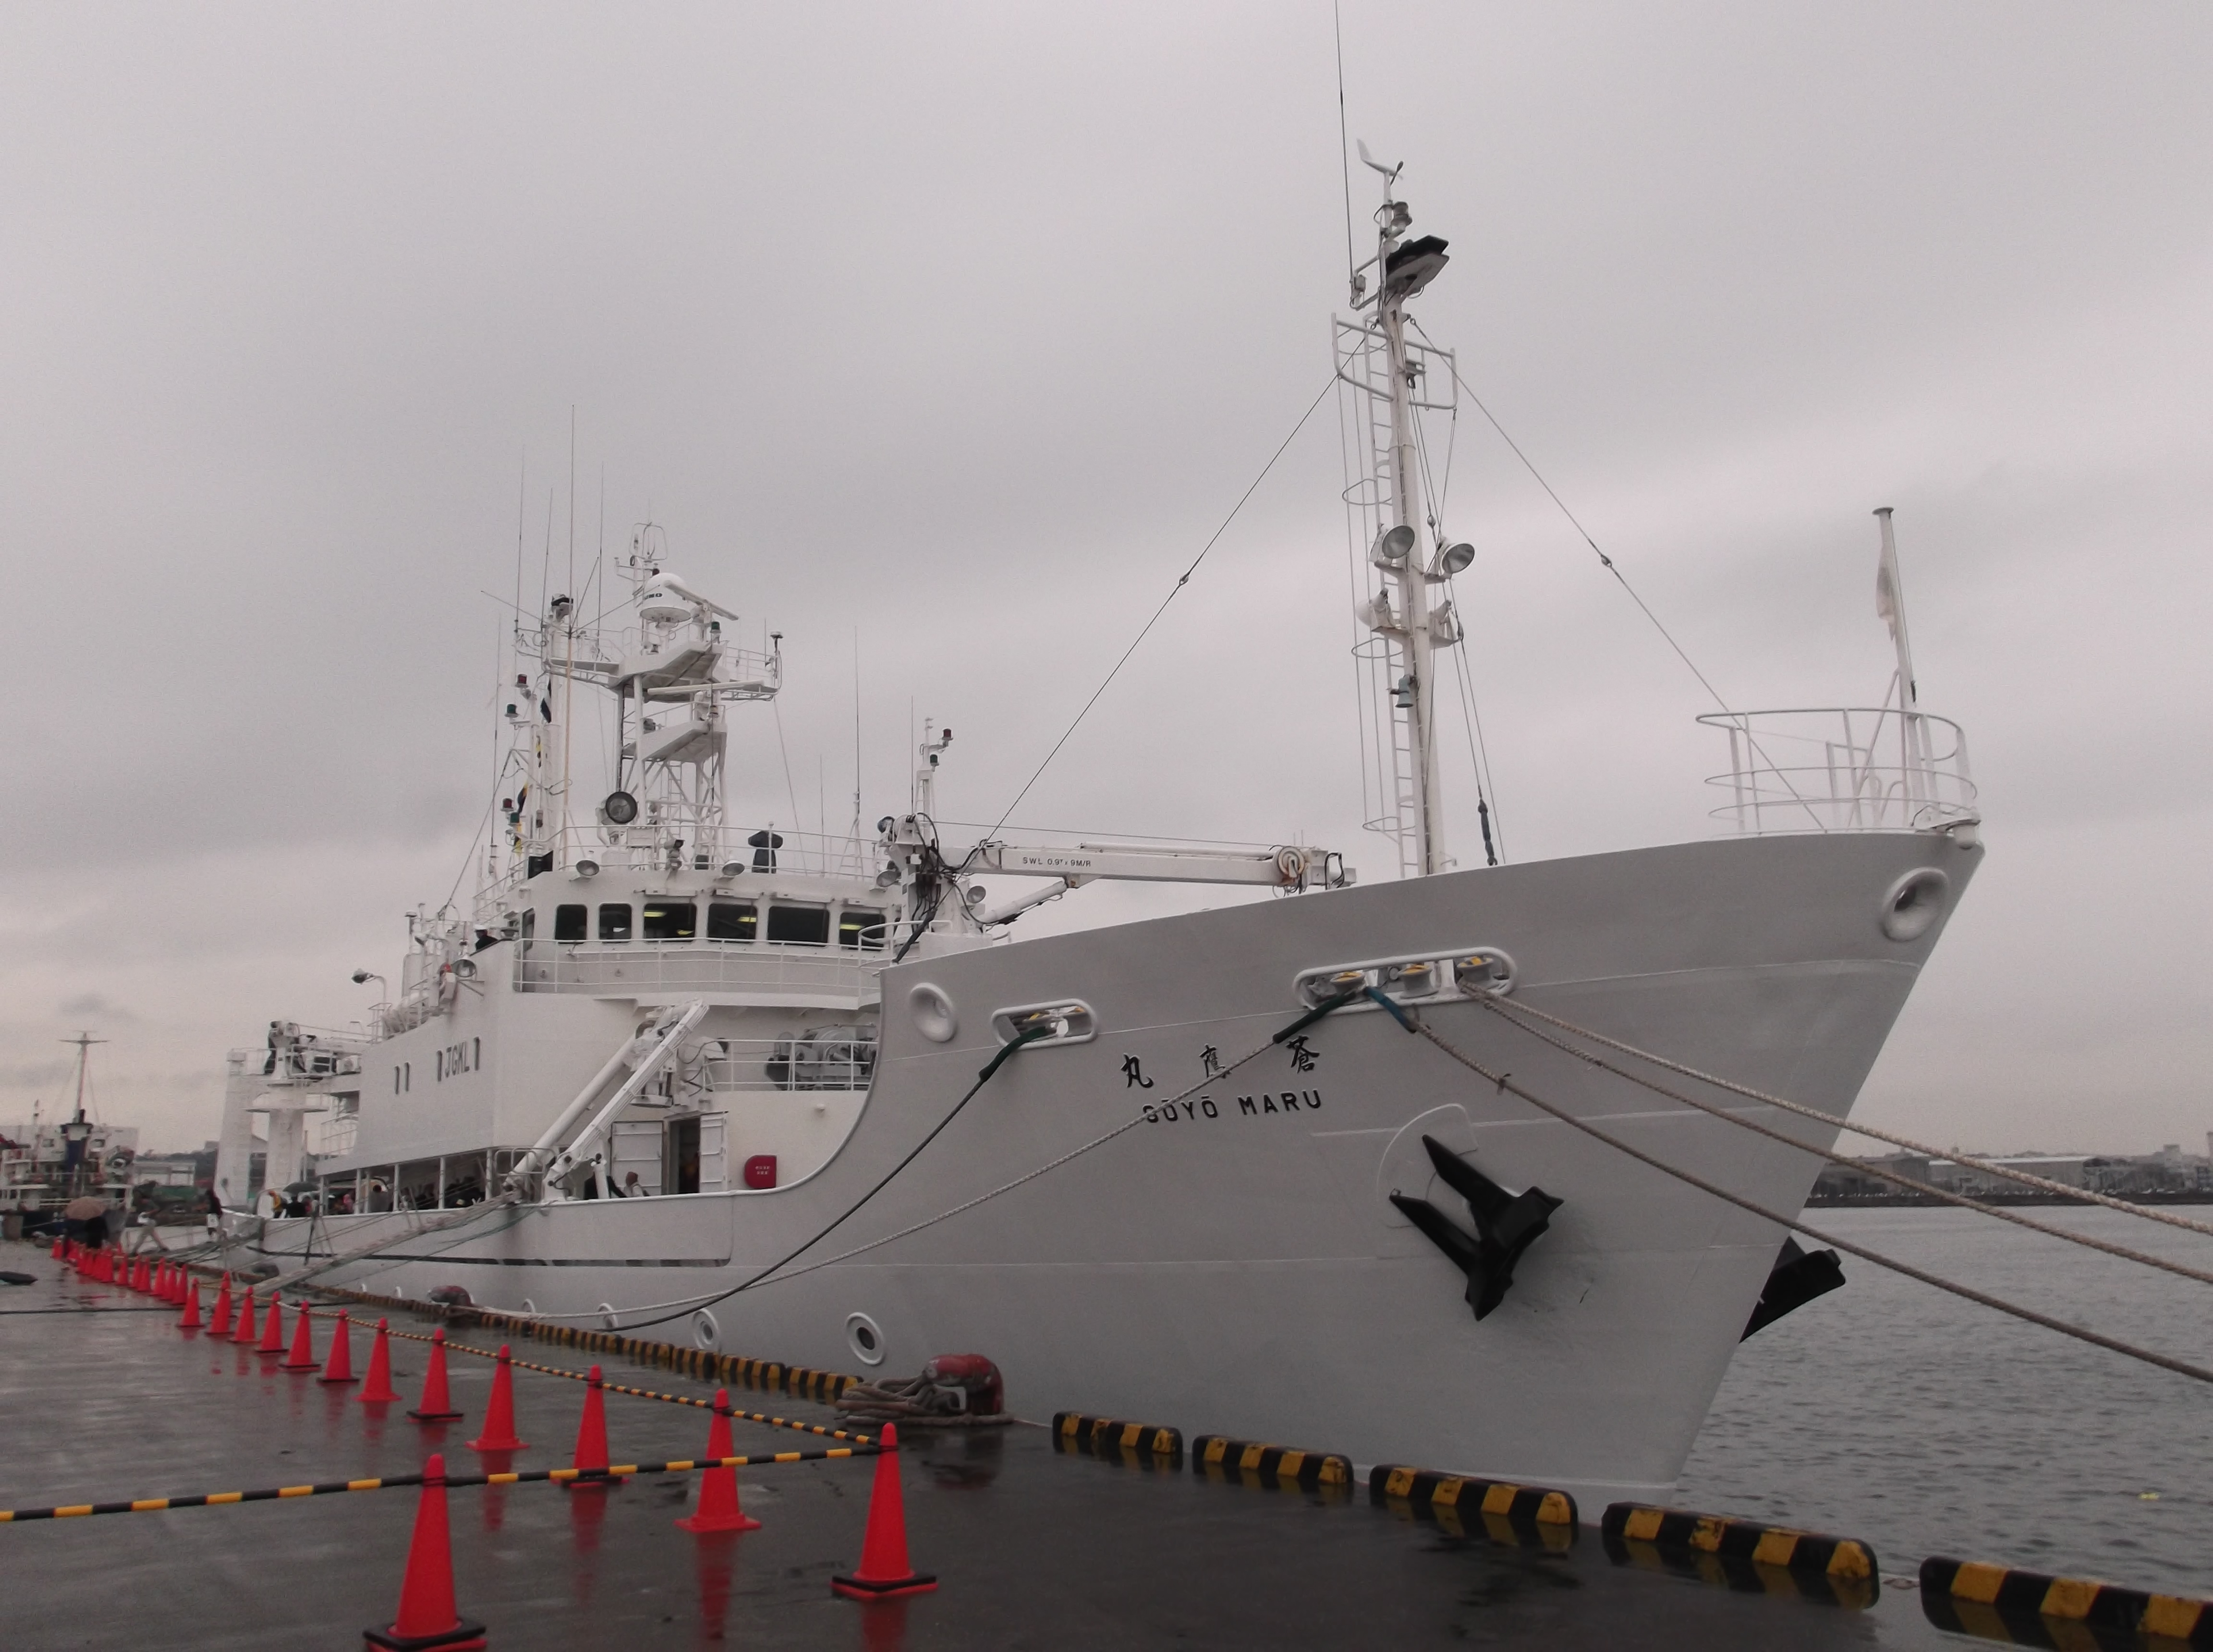 Soyo-maru, an investigation ship of National Research Institute of Fisheries Science,Fisheries Research Agency, at the Kanazawa Pier of Yokohama Port